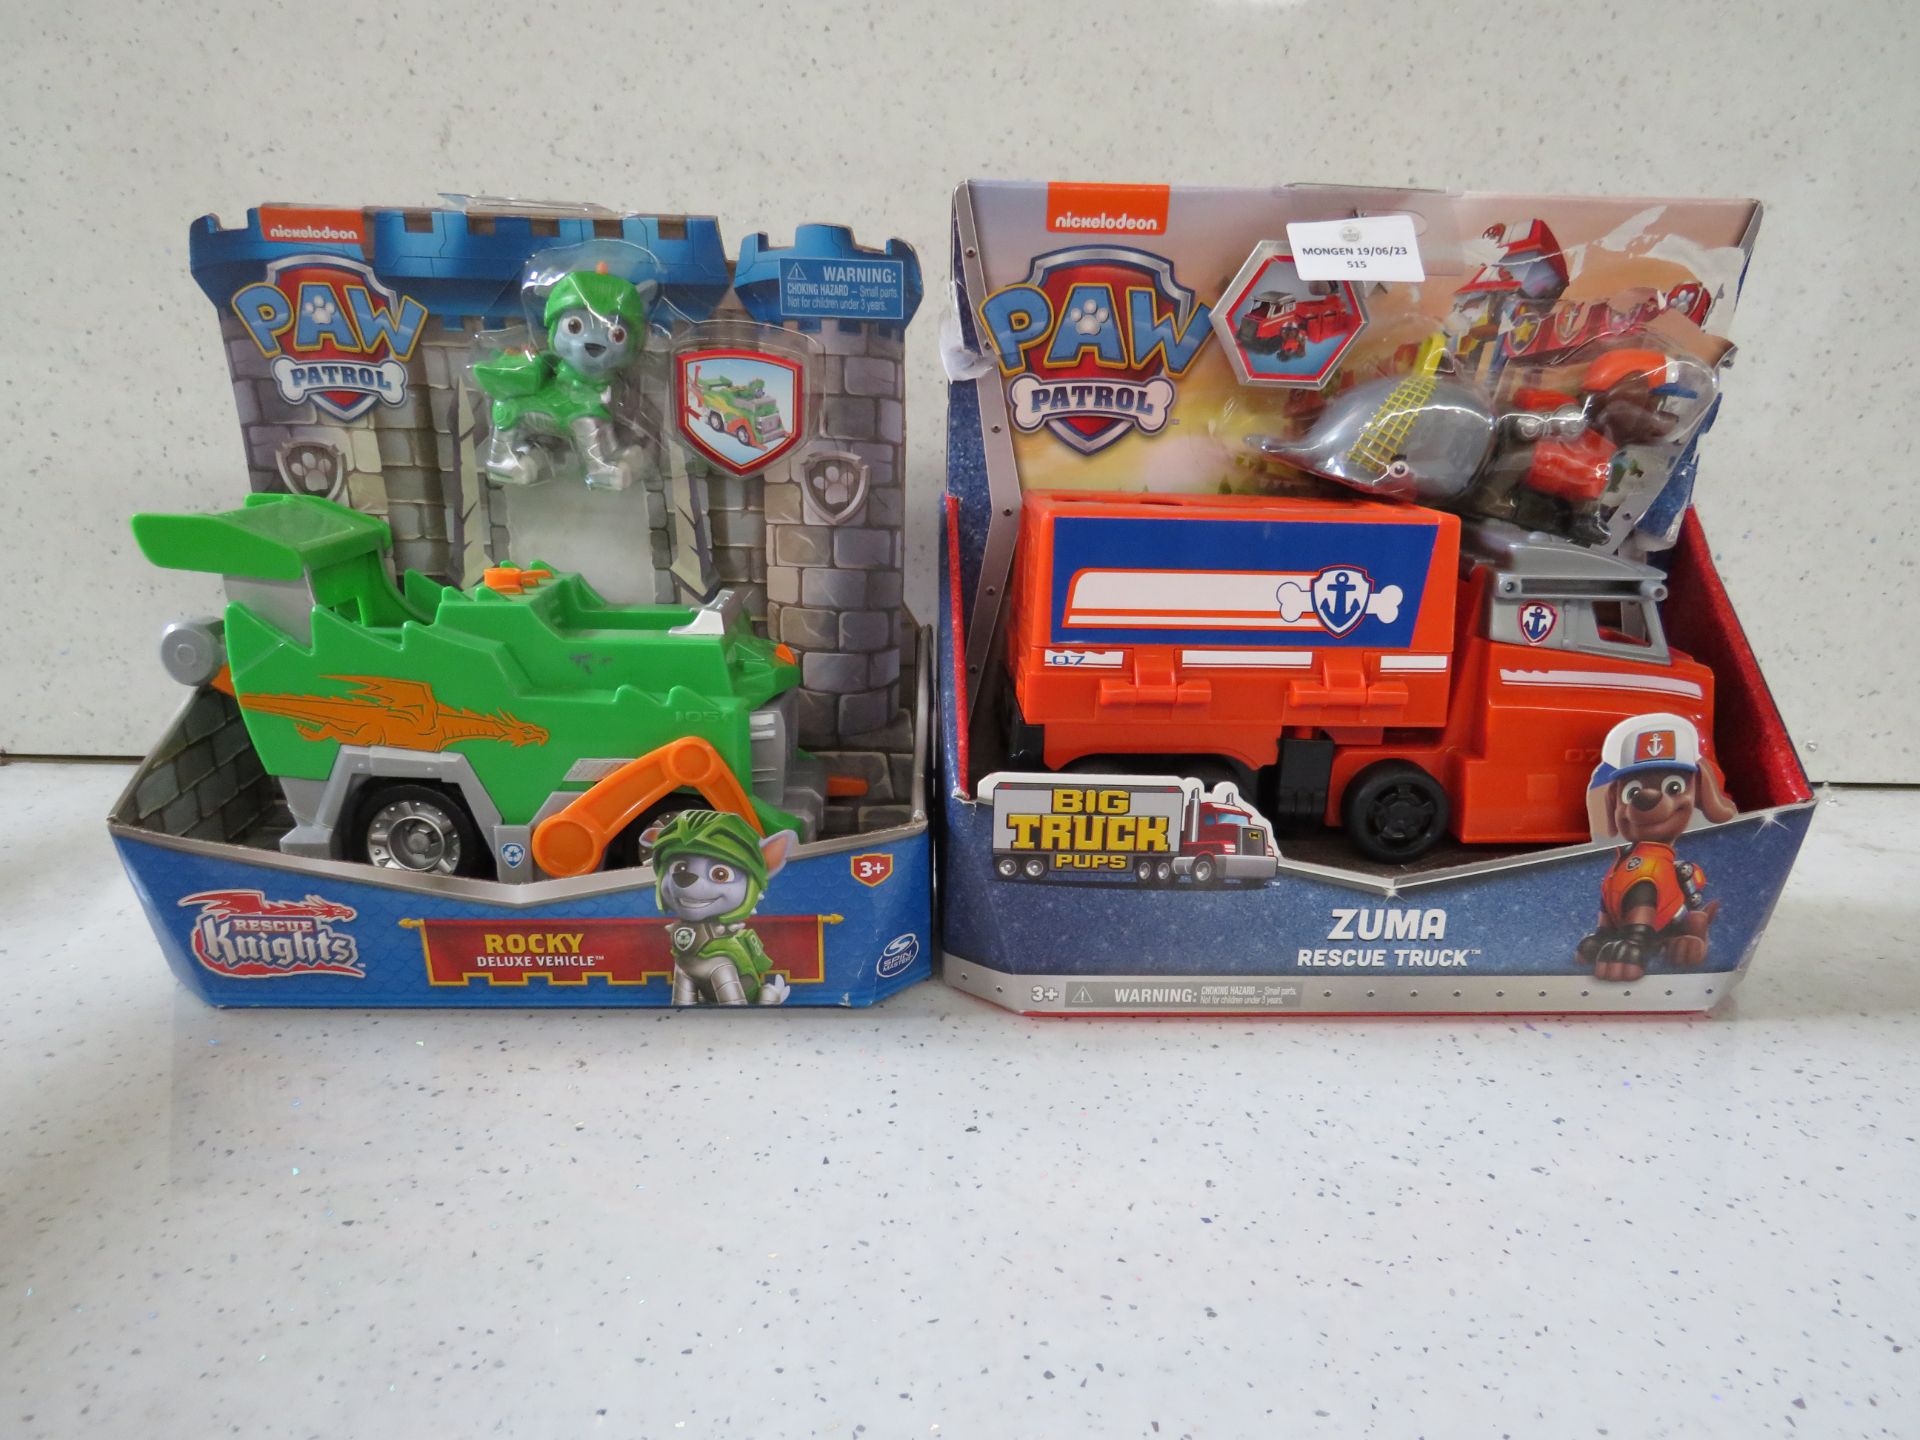 1x Nickelodeon - Resue Knights Rocky Deluxe Vehicle - Good Condition & Boxed. 1x Nickelodeon - Big